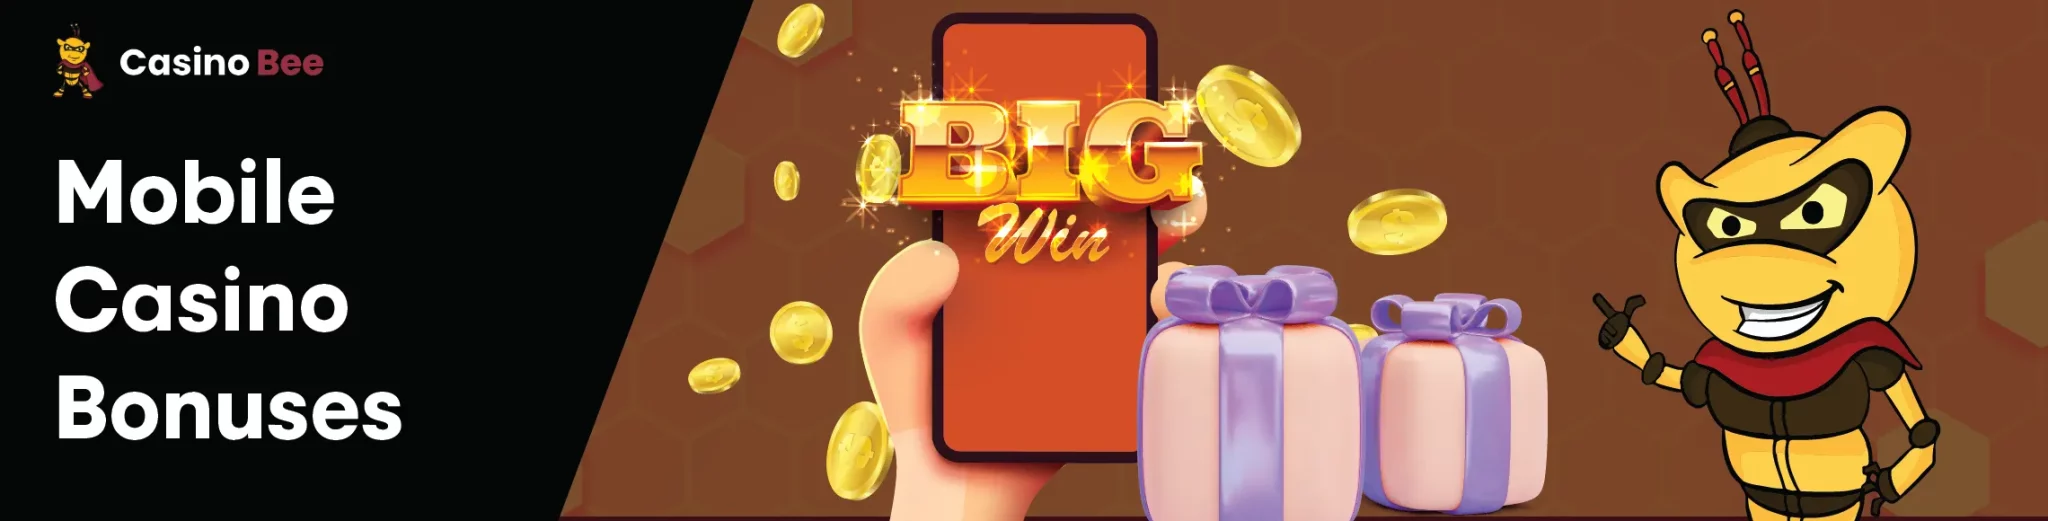 Unleash the Full Potential of Mobile Casino Gaming with Amazing Bonuses!